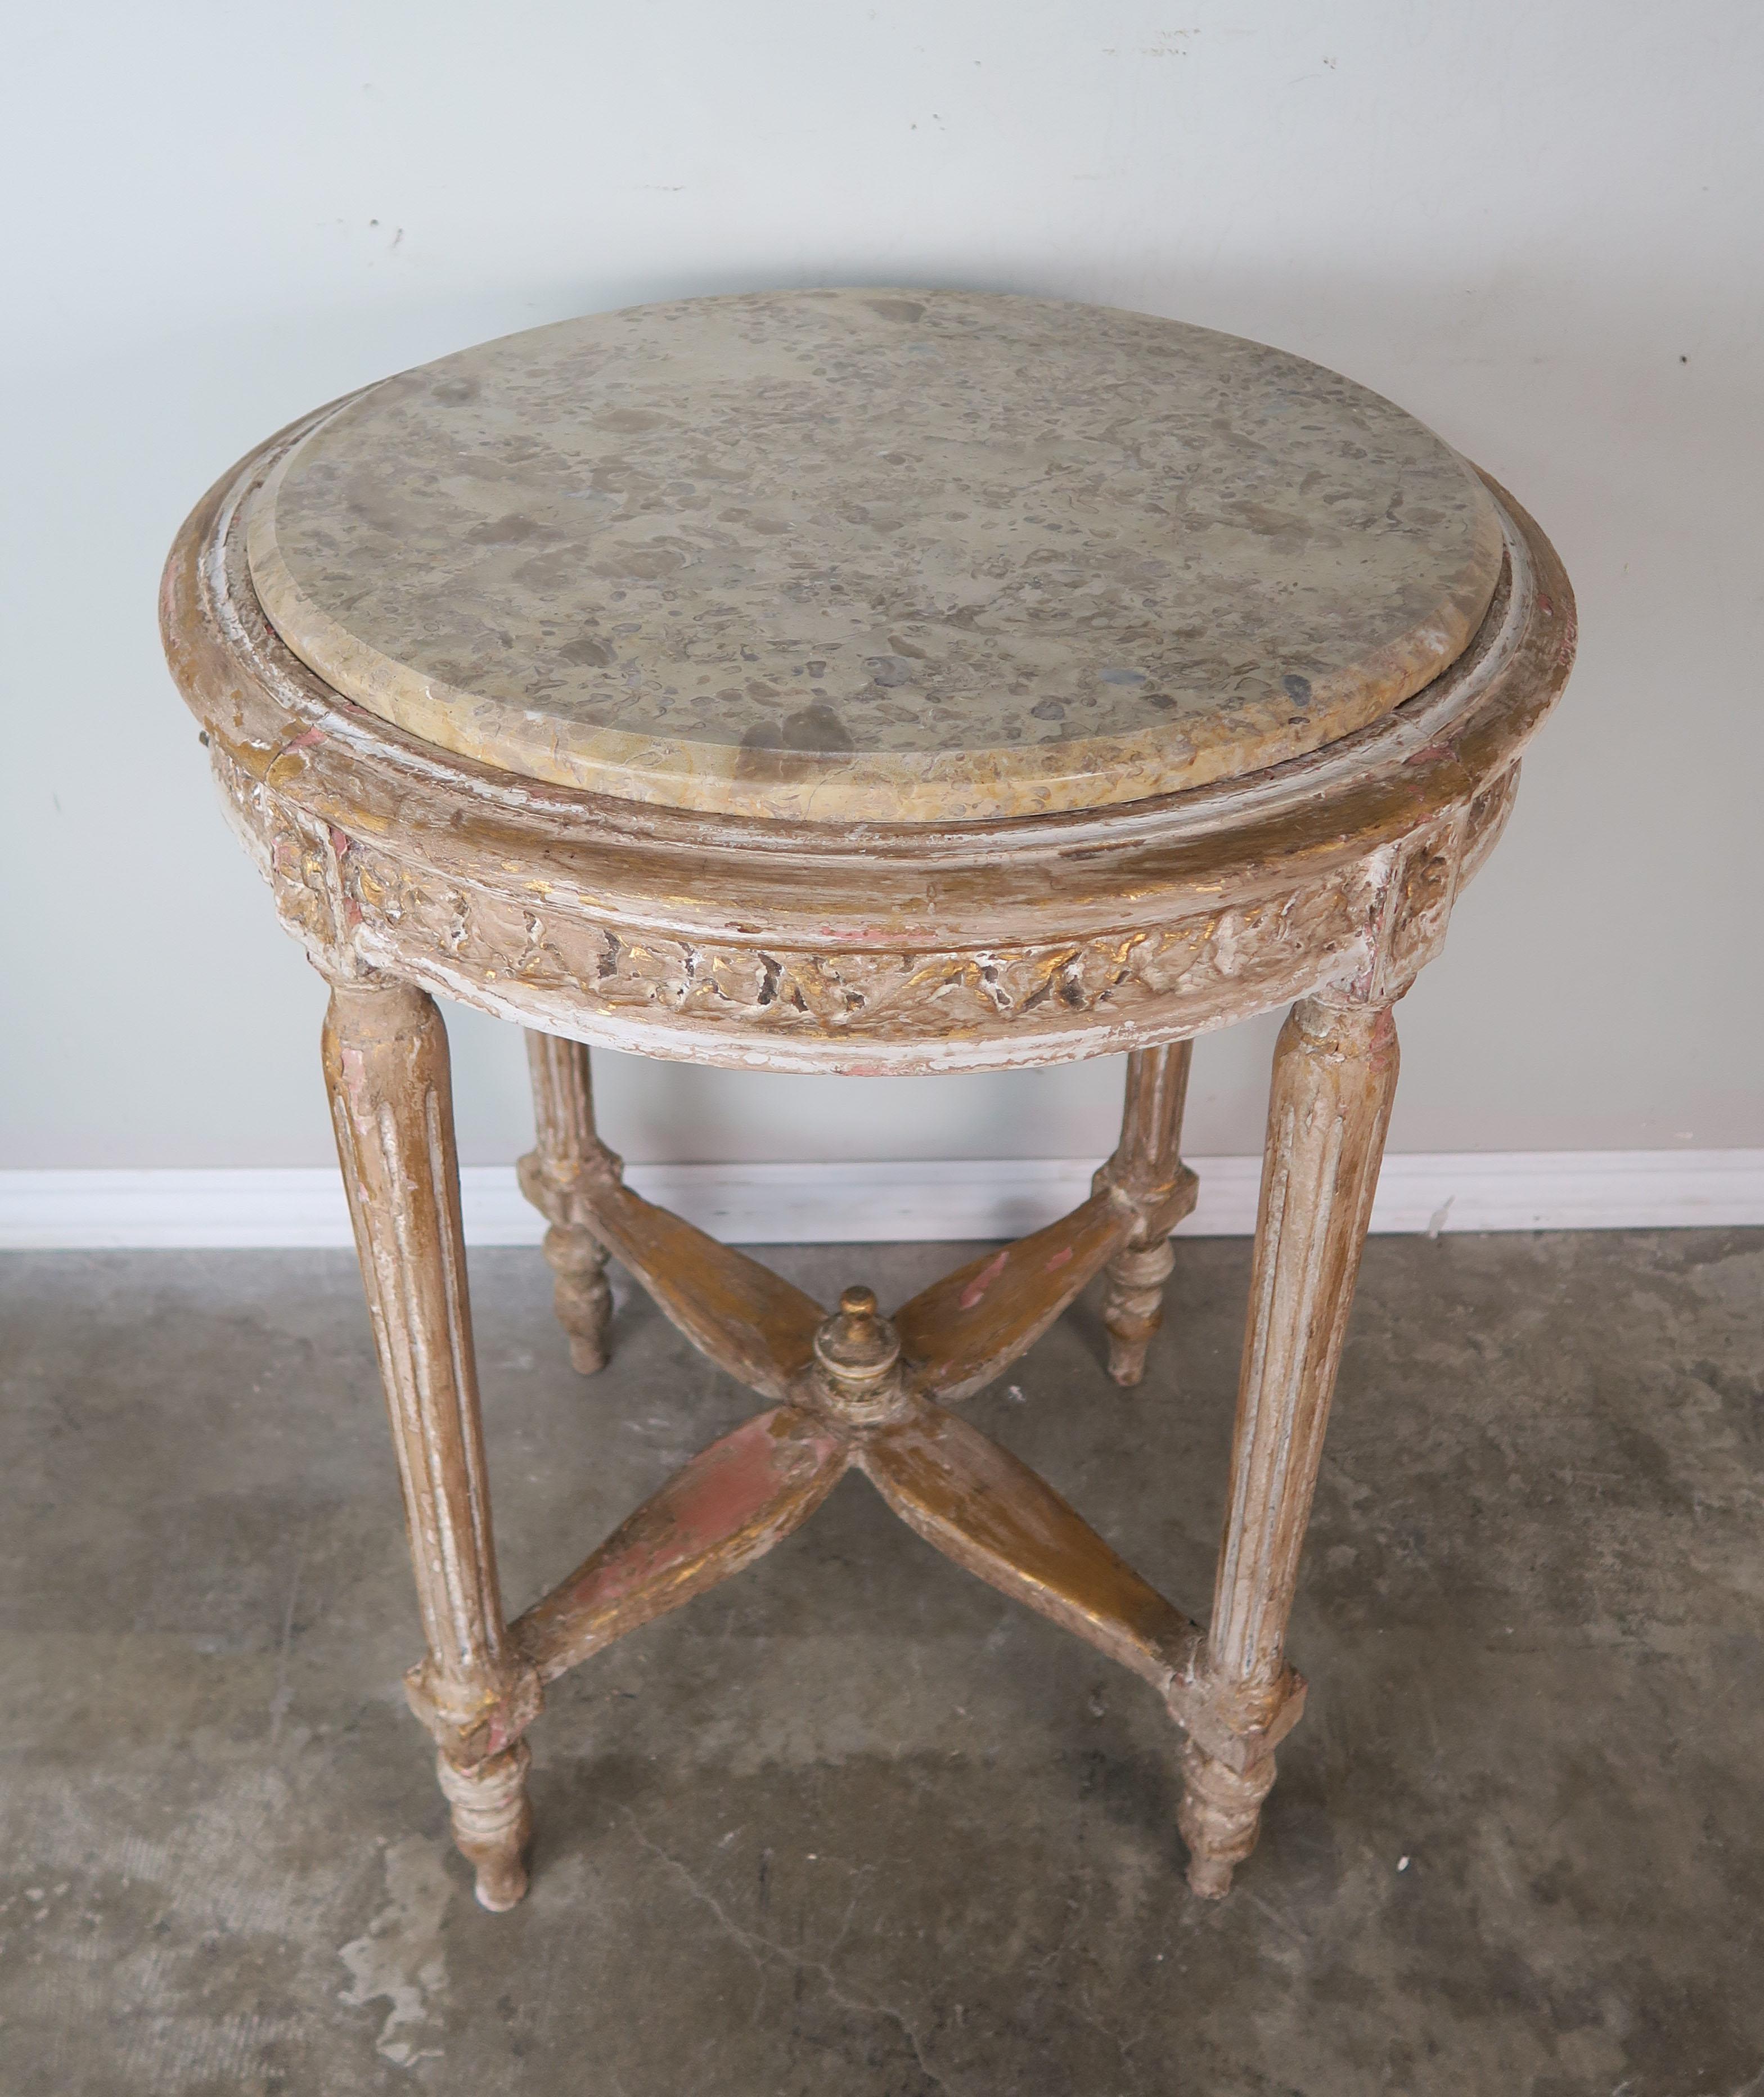 French Louis XVI style side table in a painted finish with gold leaf highlights throughout. The table stands on four straight fluted legs that meet together at a centre finial. Inset marble top in soft shades of gold, taupe and cream.